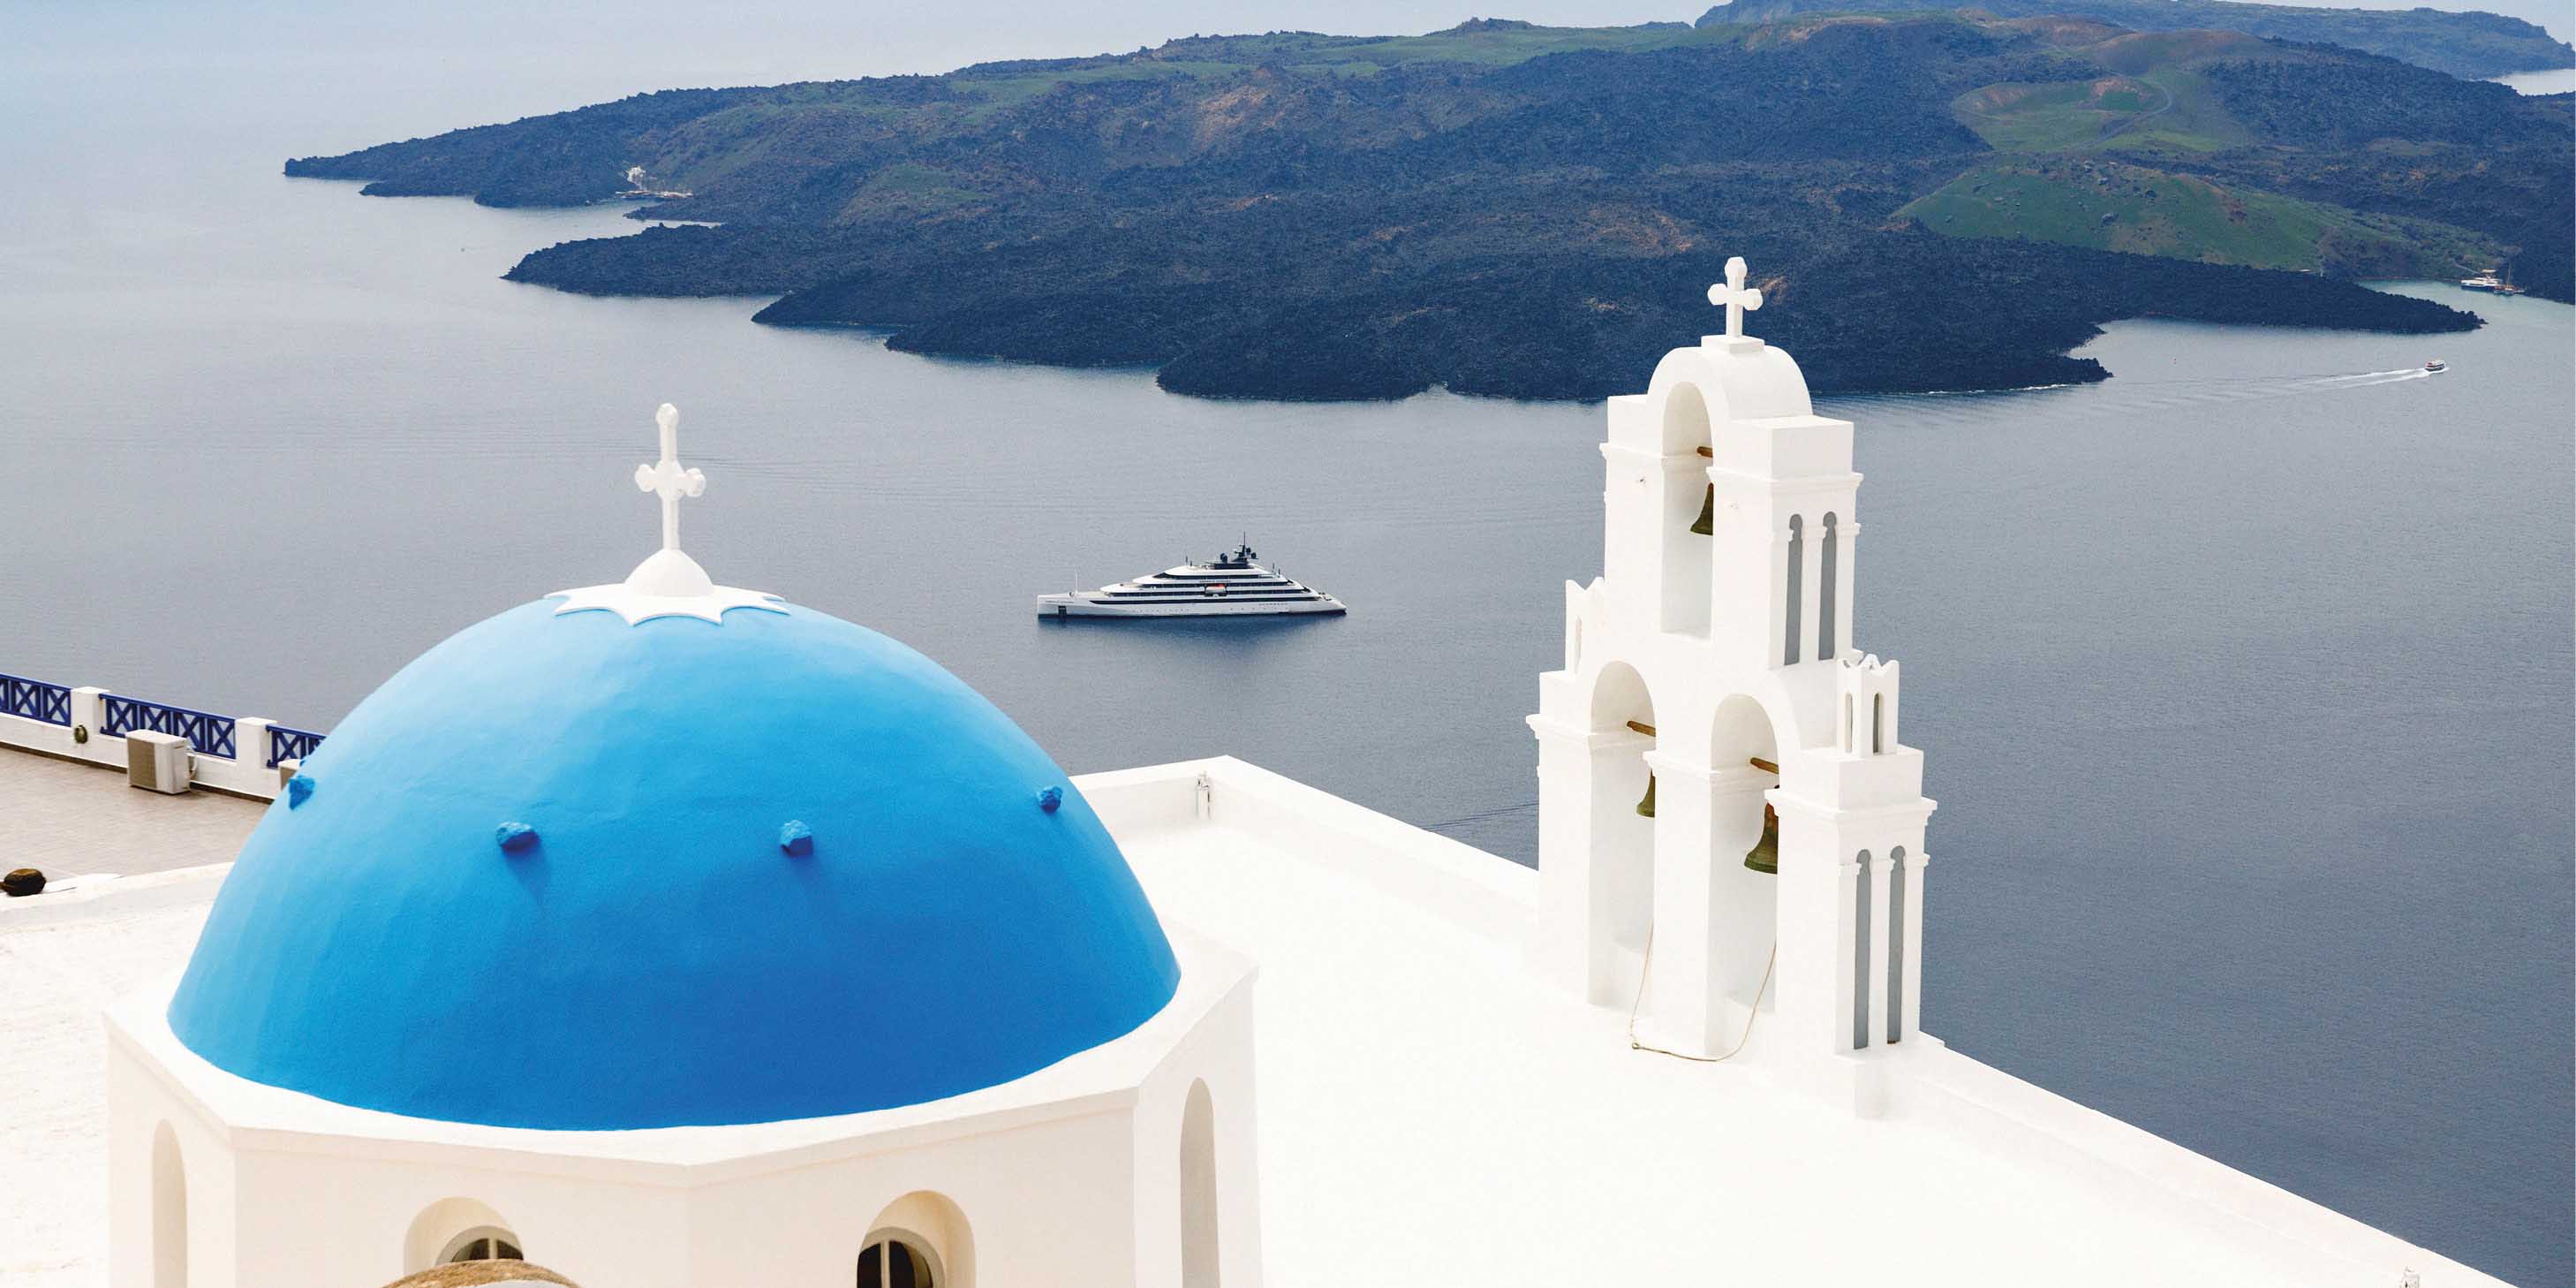  Luxury yacht sailing near the coast of Santorini surrounded by the iconic whitewashed buildings with blue rooftops